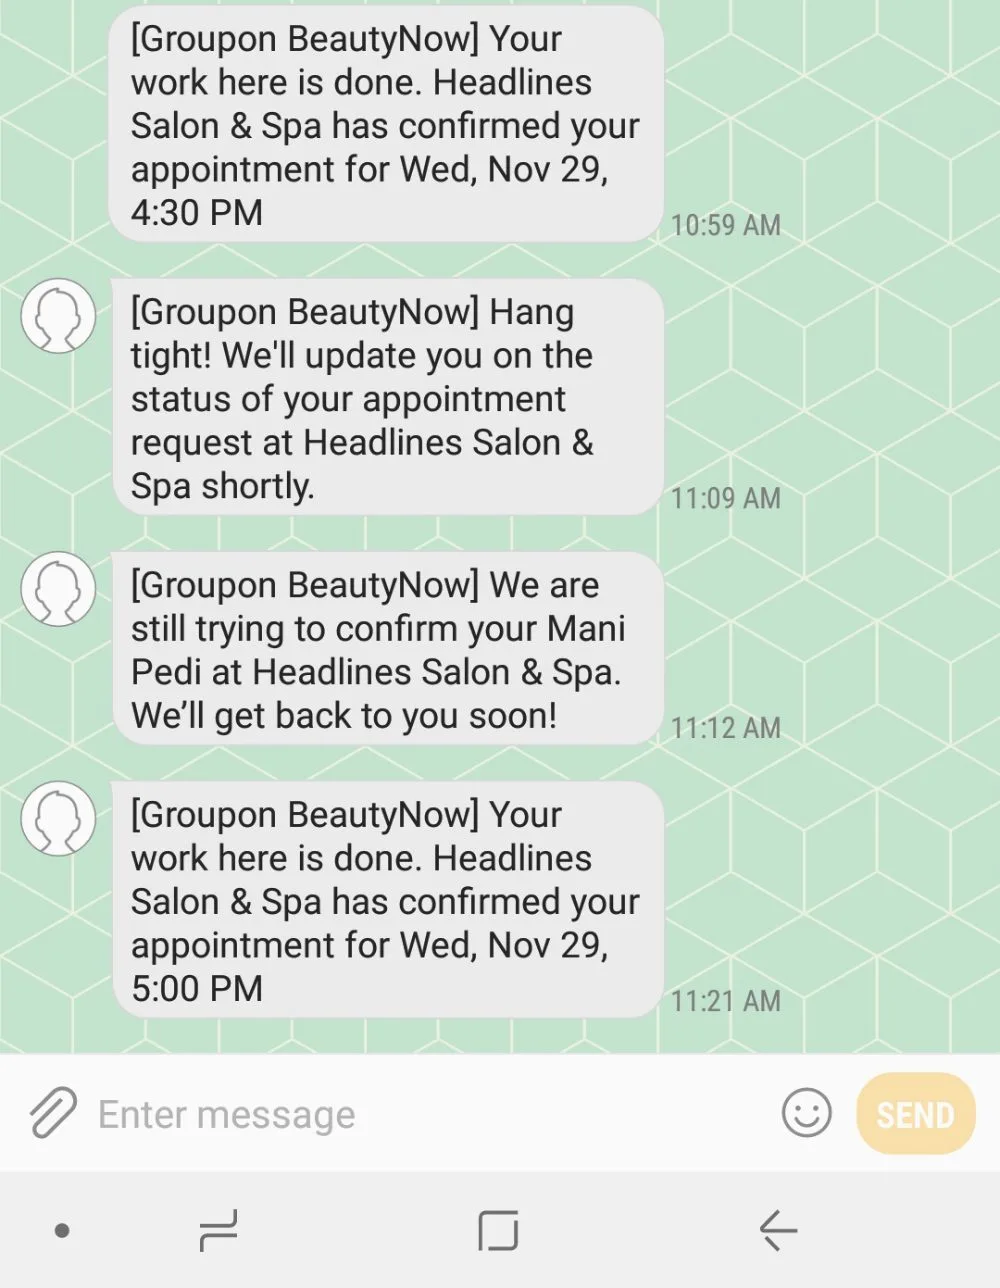 Salon Services Via the Groupon App Giveaway #GrouponBeautyNow #GetBeautyNow AD